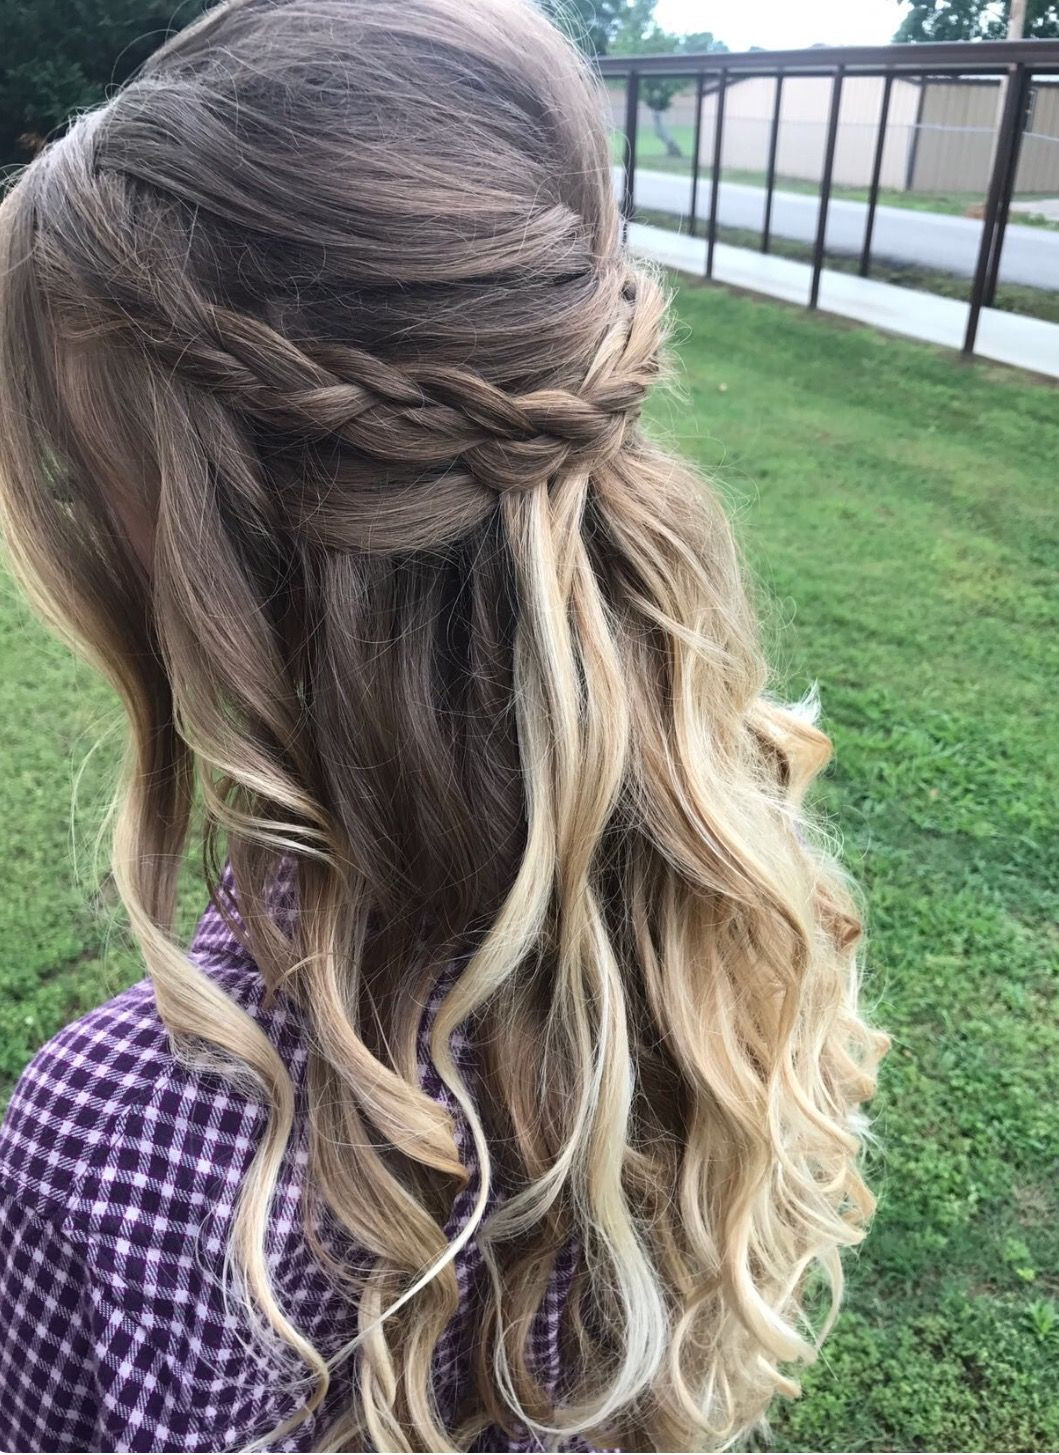 Prom Hairstyles Down With Braid
 Half up half down hair with messy braid and loose curls